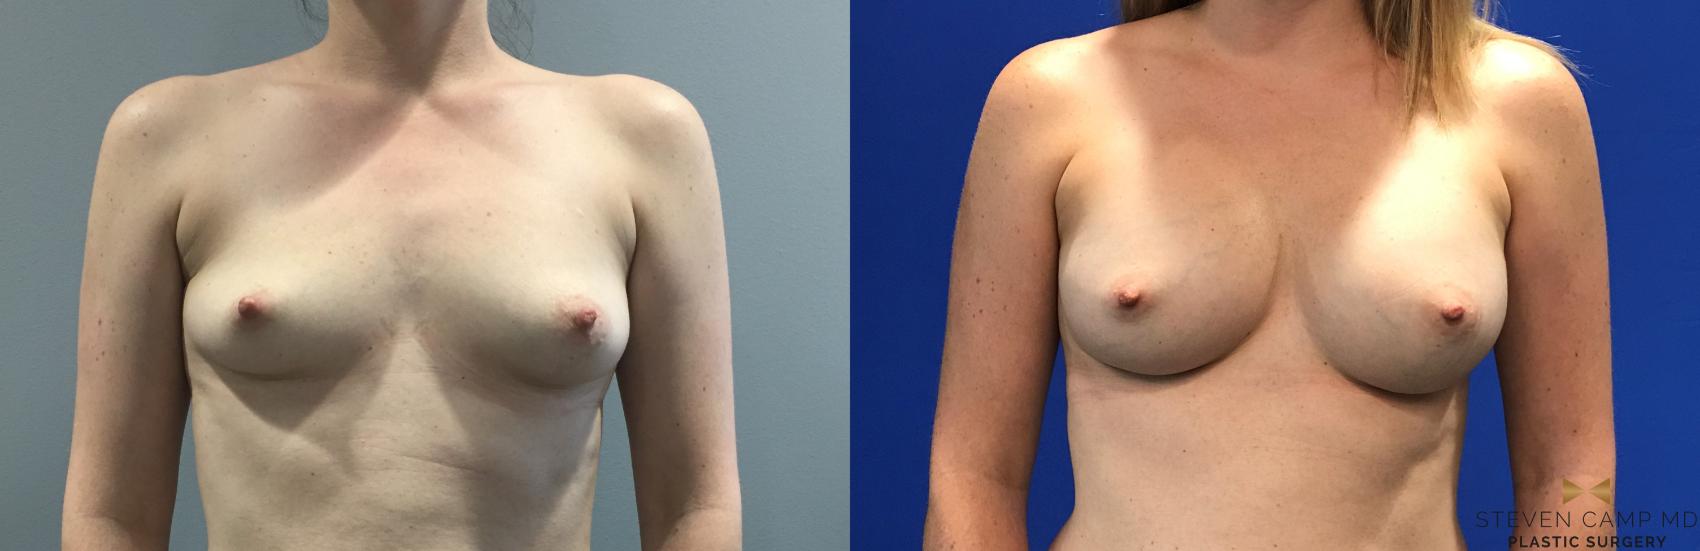 Before & After Case2992 by Steven Camp MD Plastic Surgery & Aesthetics, in Fort Worth